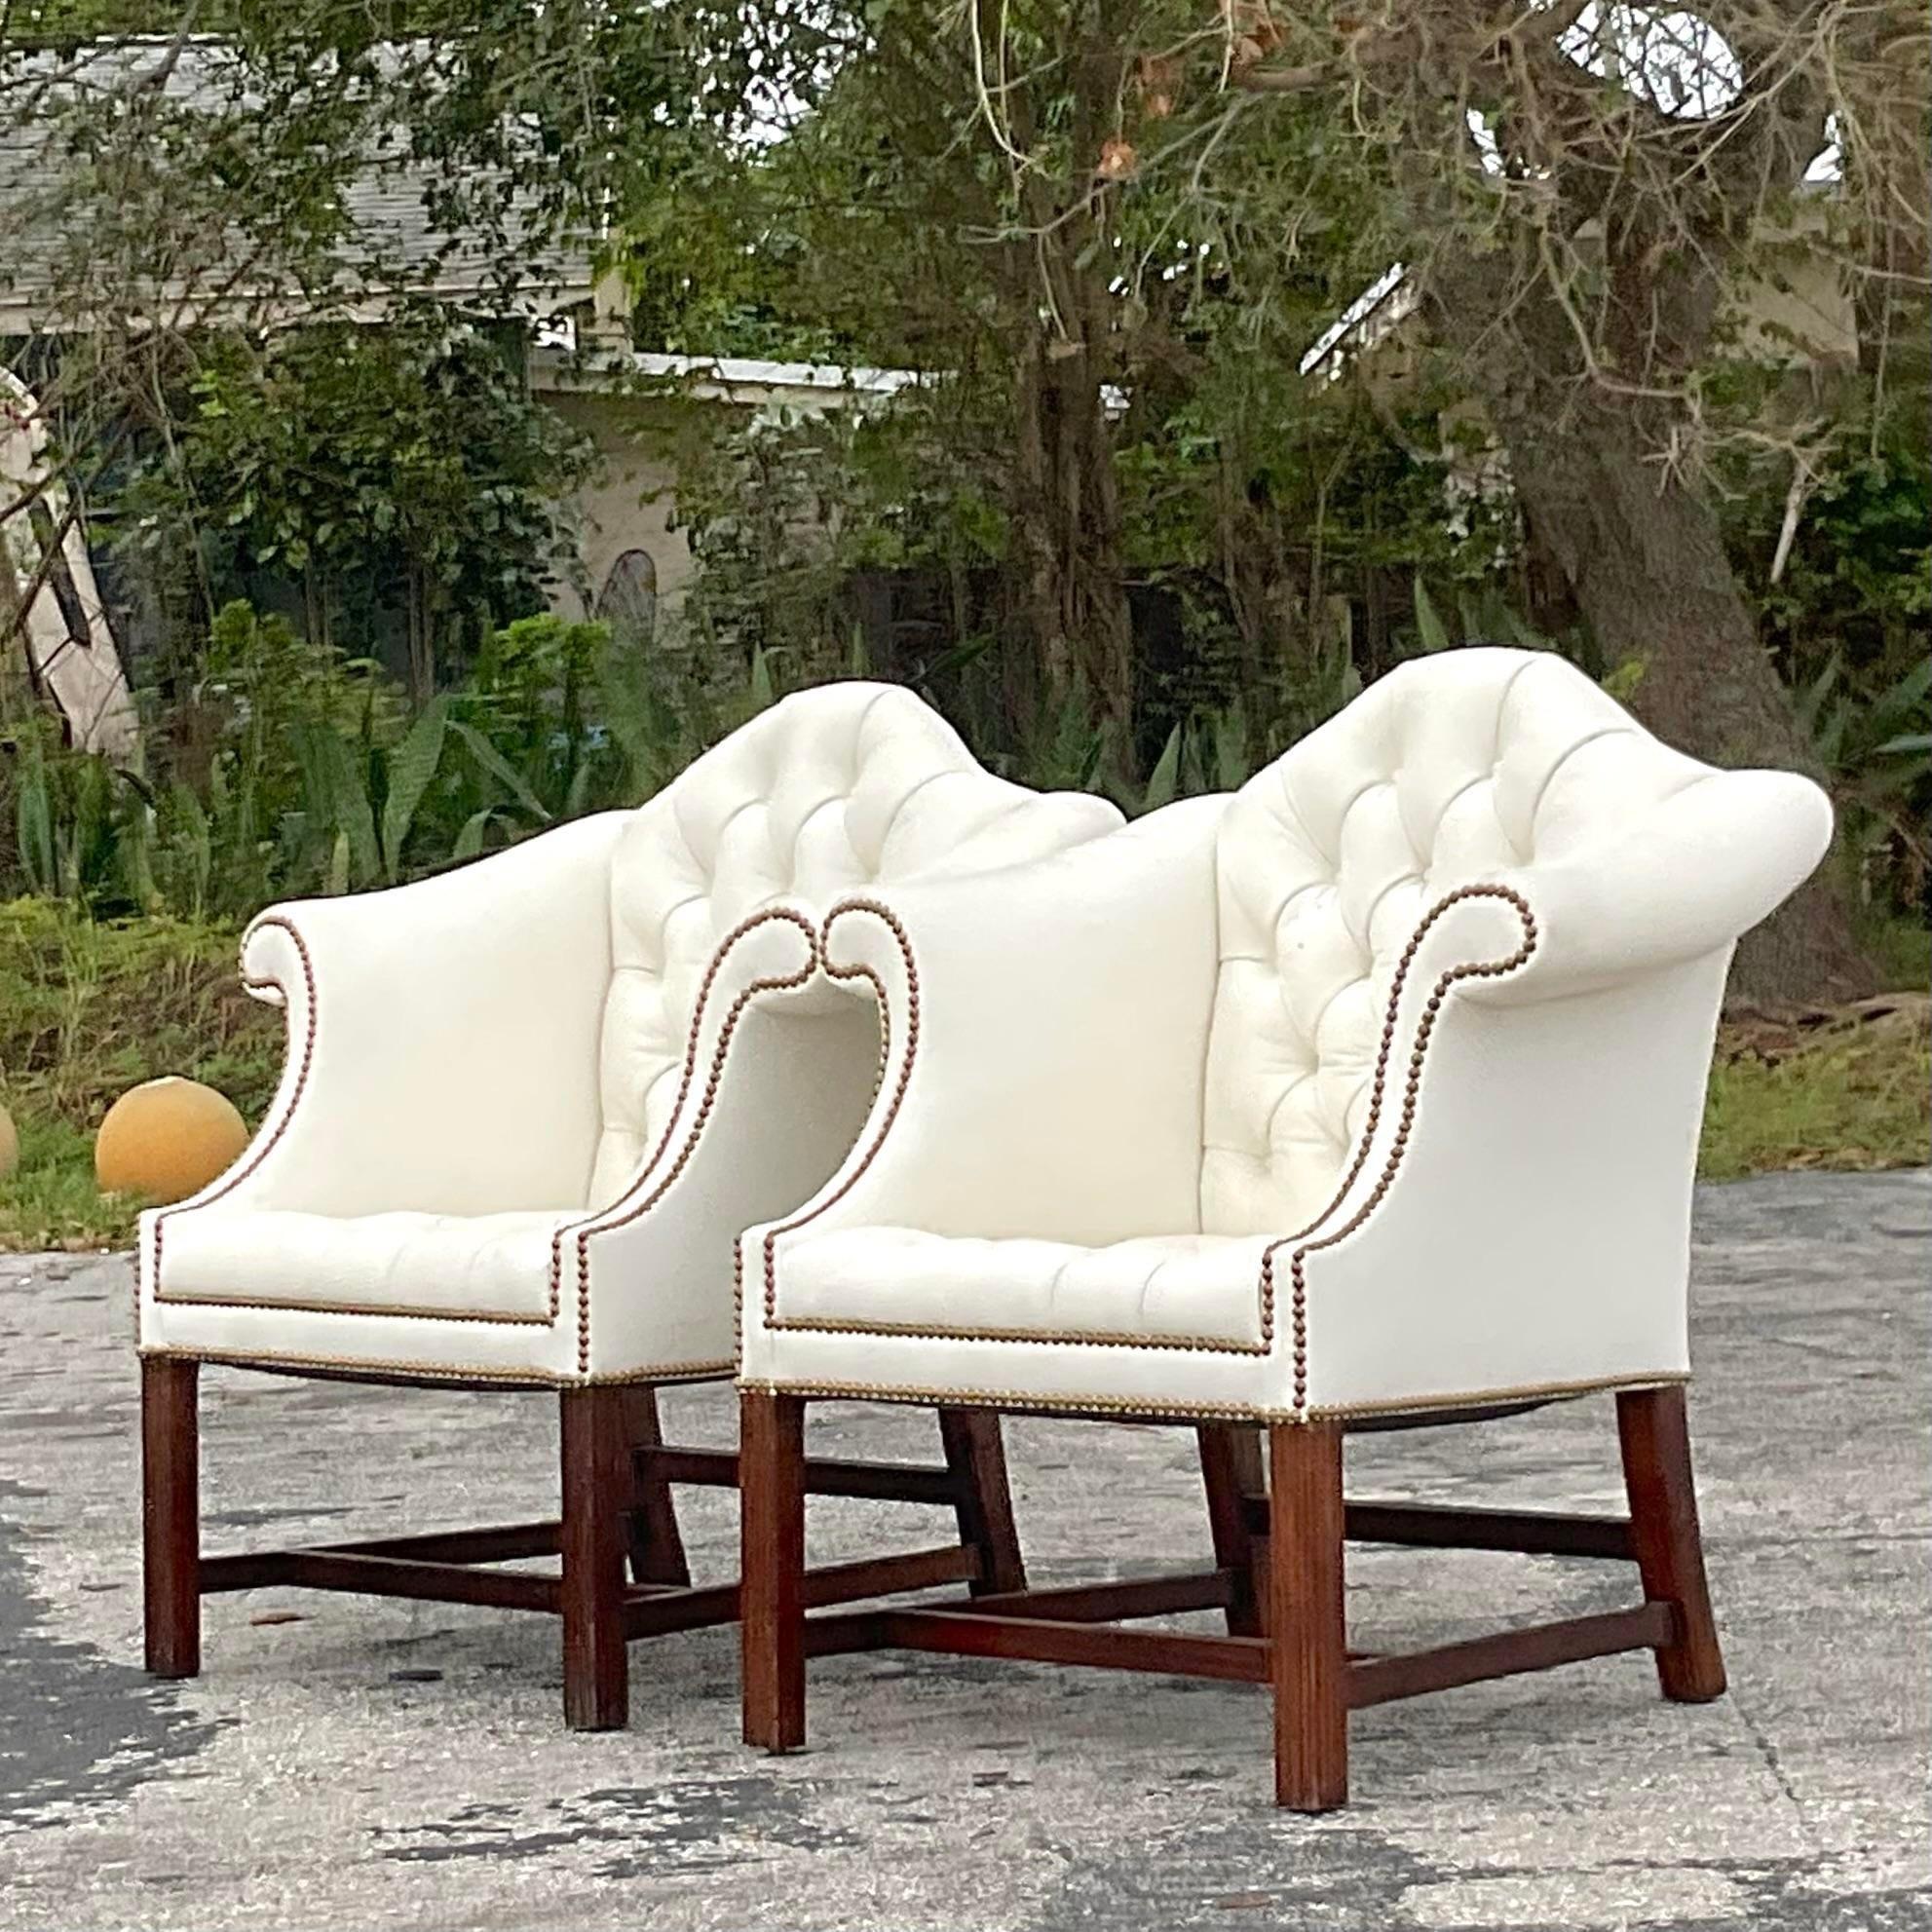 Vintage Traditional Camel Back Tufted Leather Arm Chairs - a Pair For Sale 2